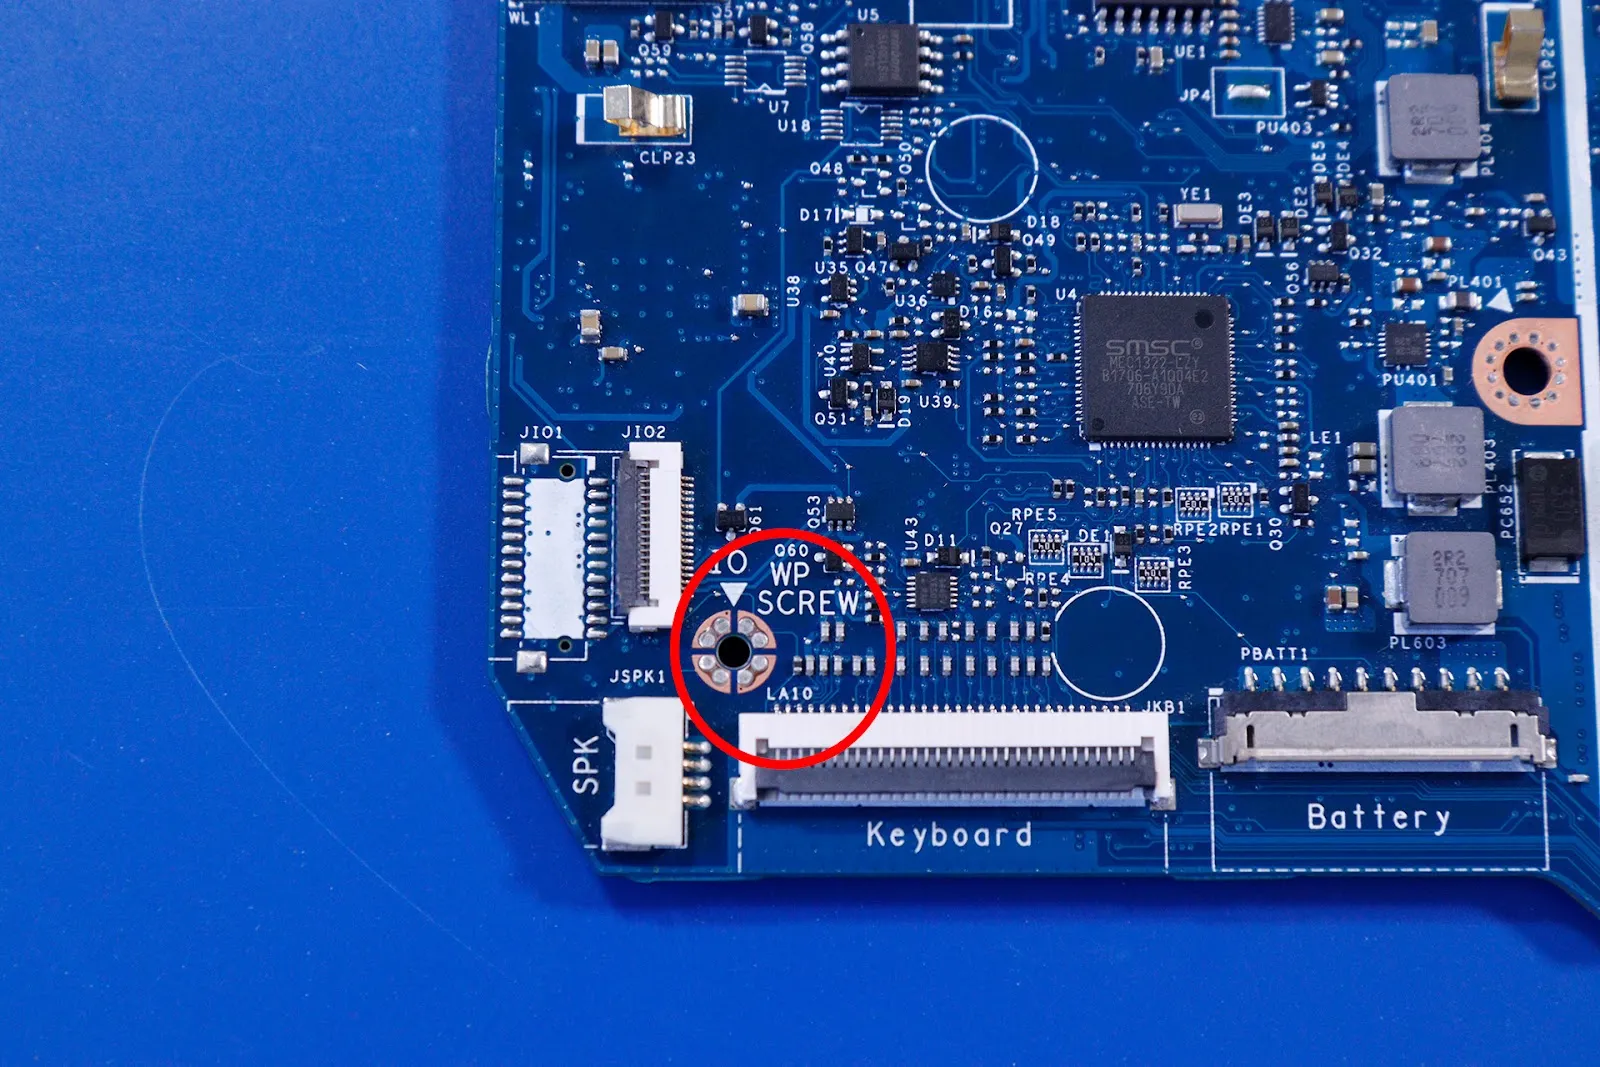 image of read write screw location on motherboard